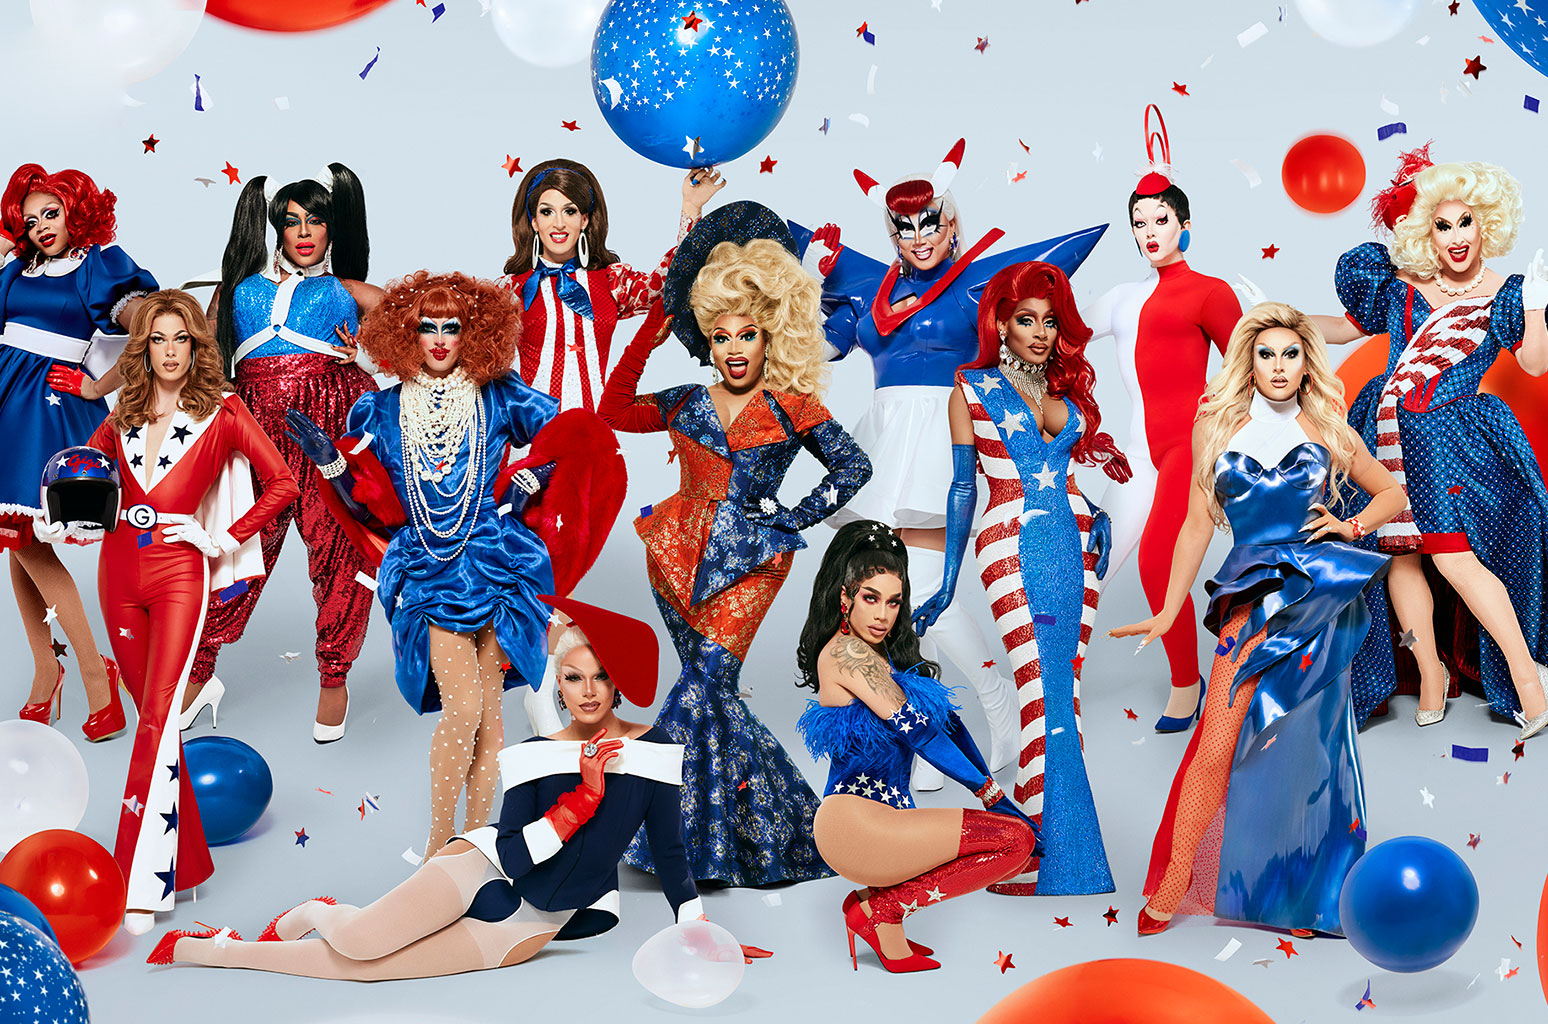 'RuPaul's Drag Race' Season 12 Is Ready to Take Over 'RuMerica': Meet the New Queens